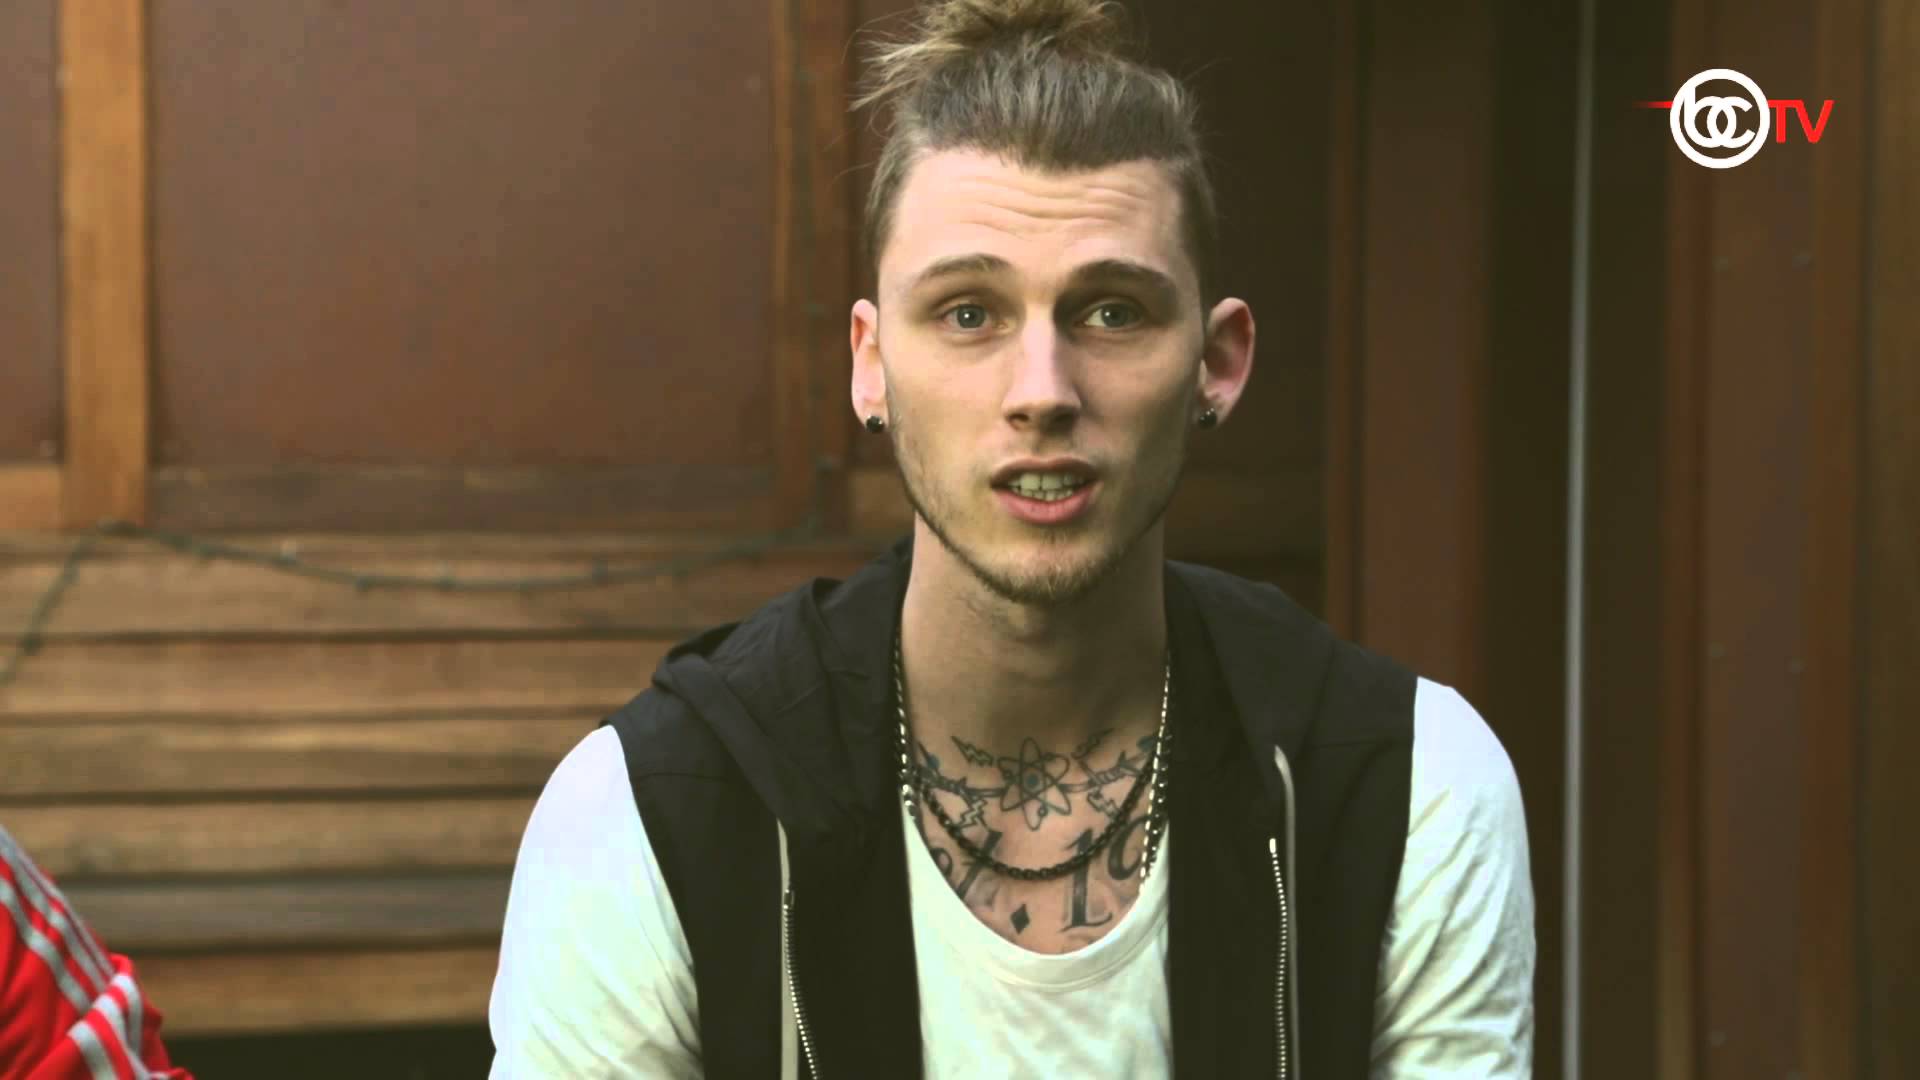 Machine Gun Kelly I Die, New Music & Getting to The Top